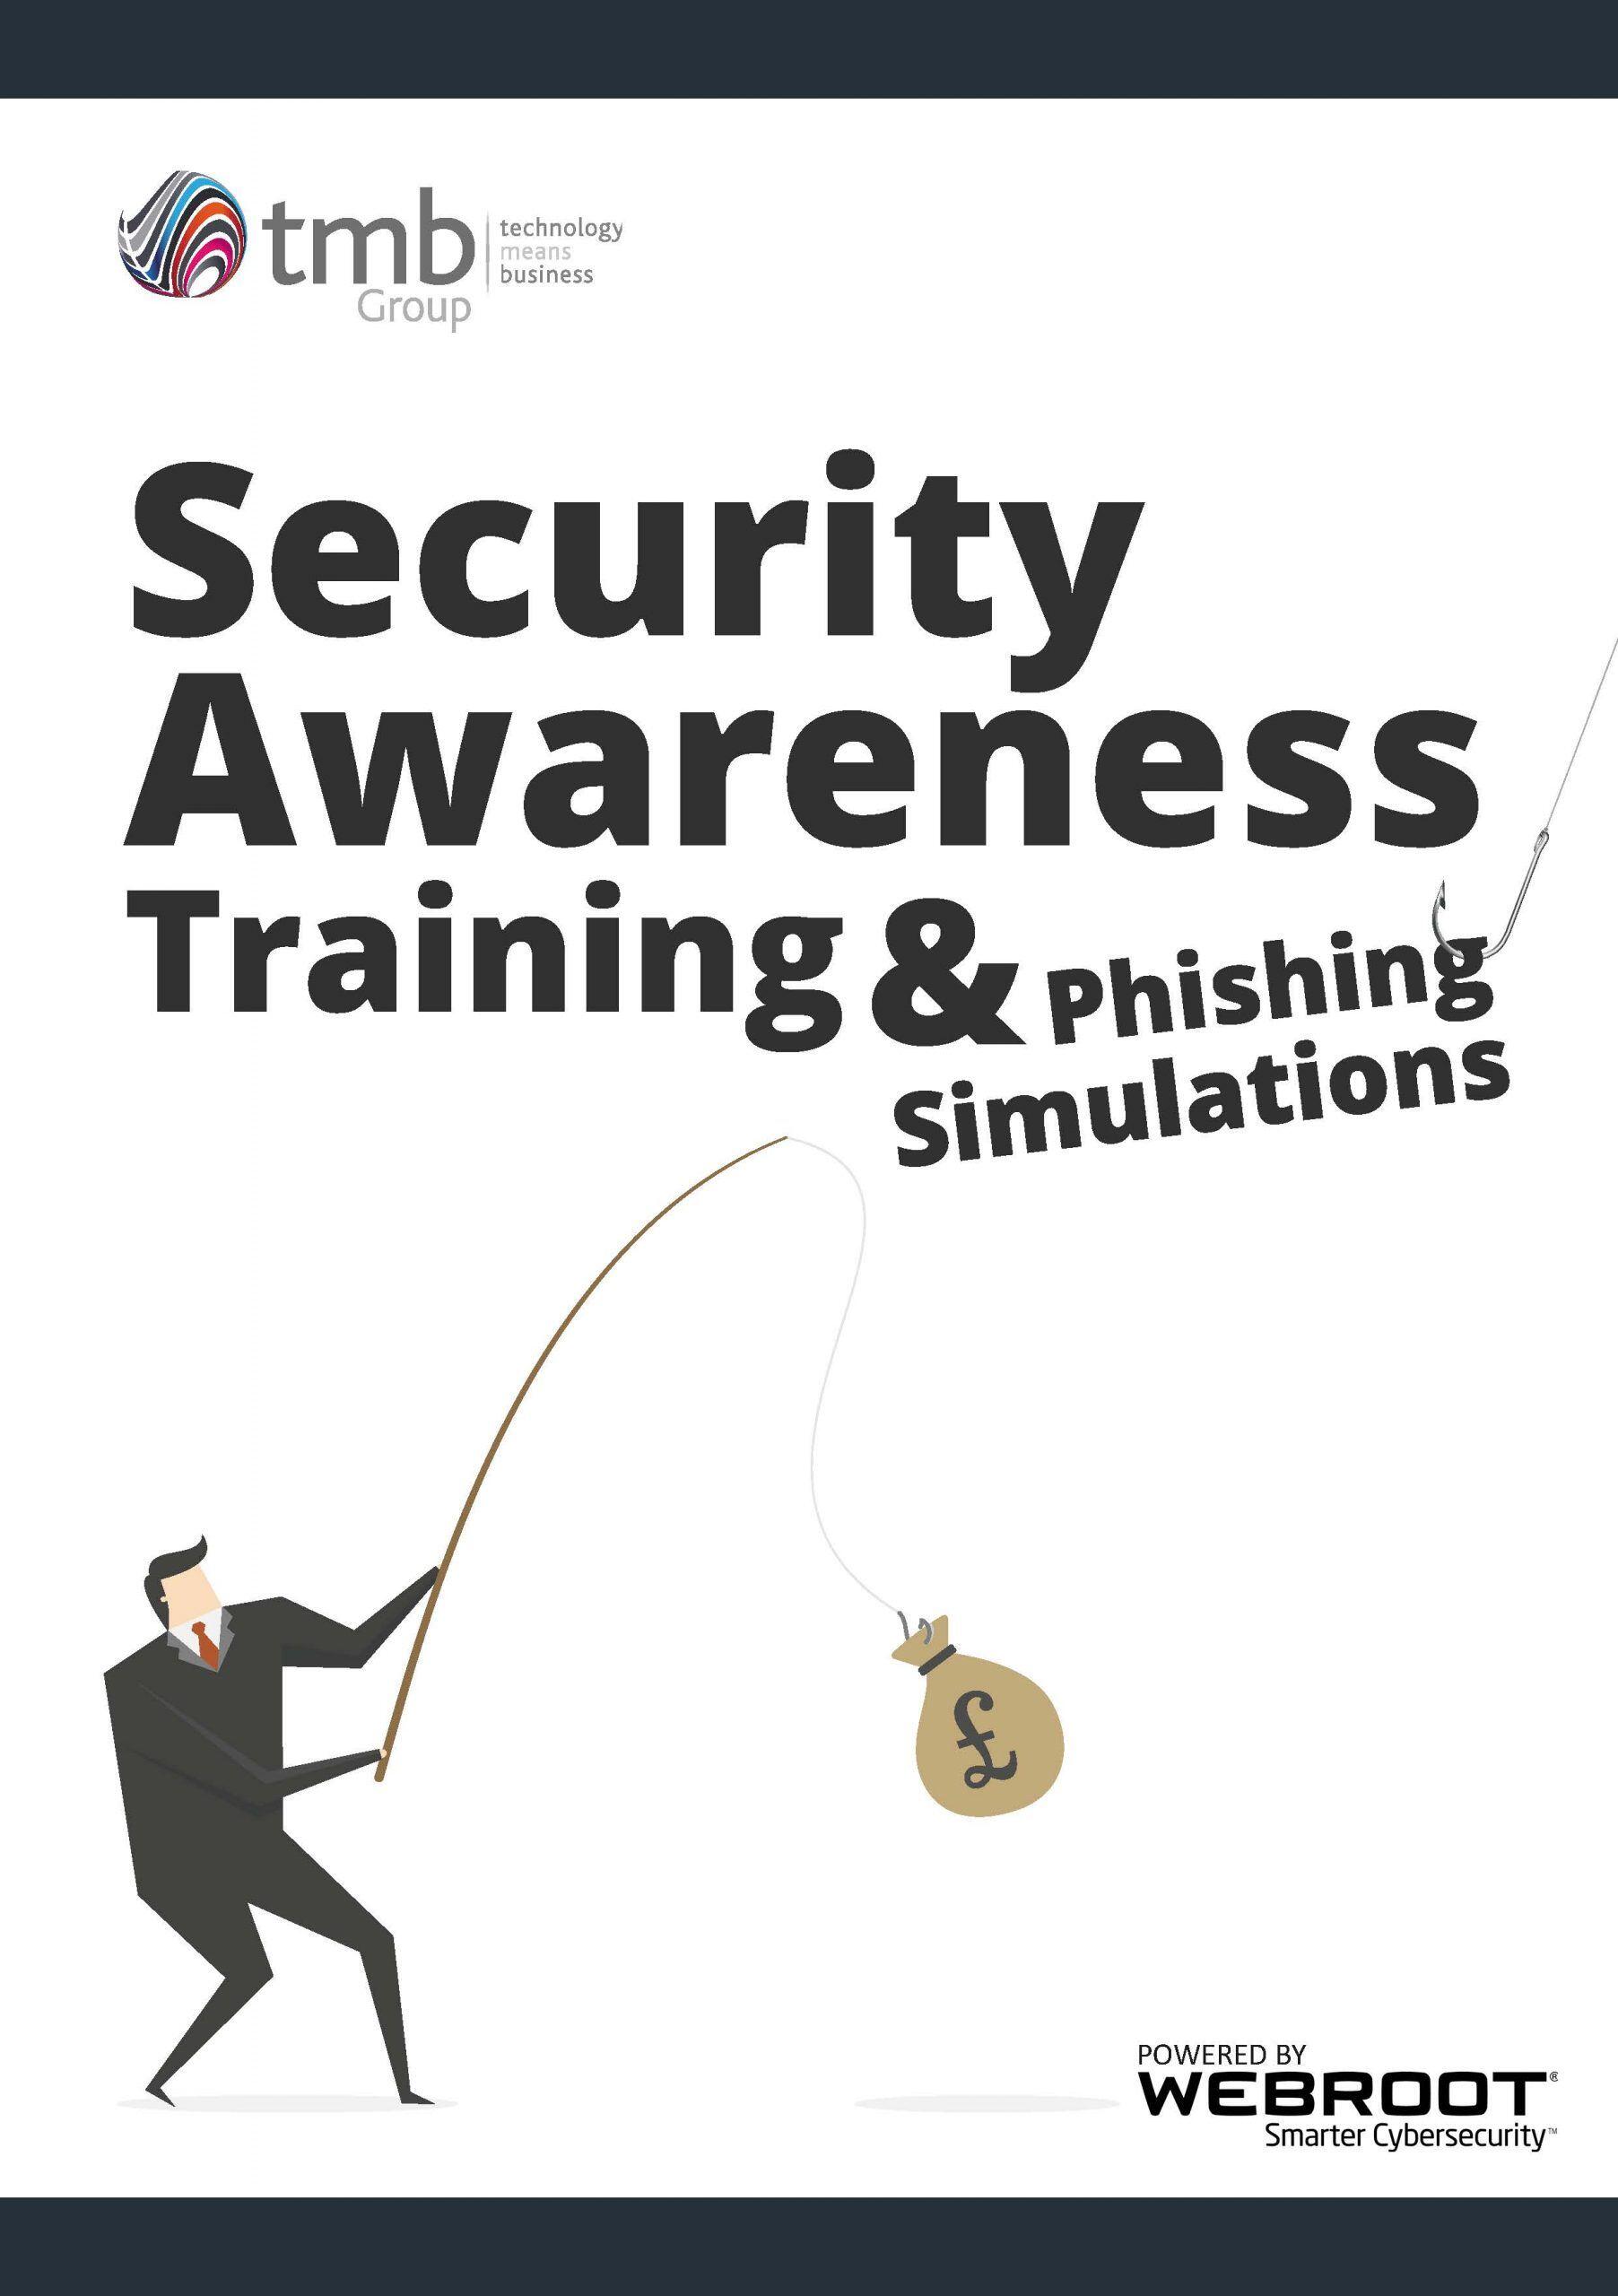 tmb_security_awareness_Page_1-scaled